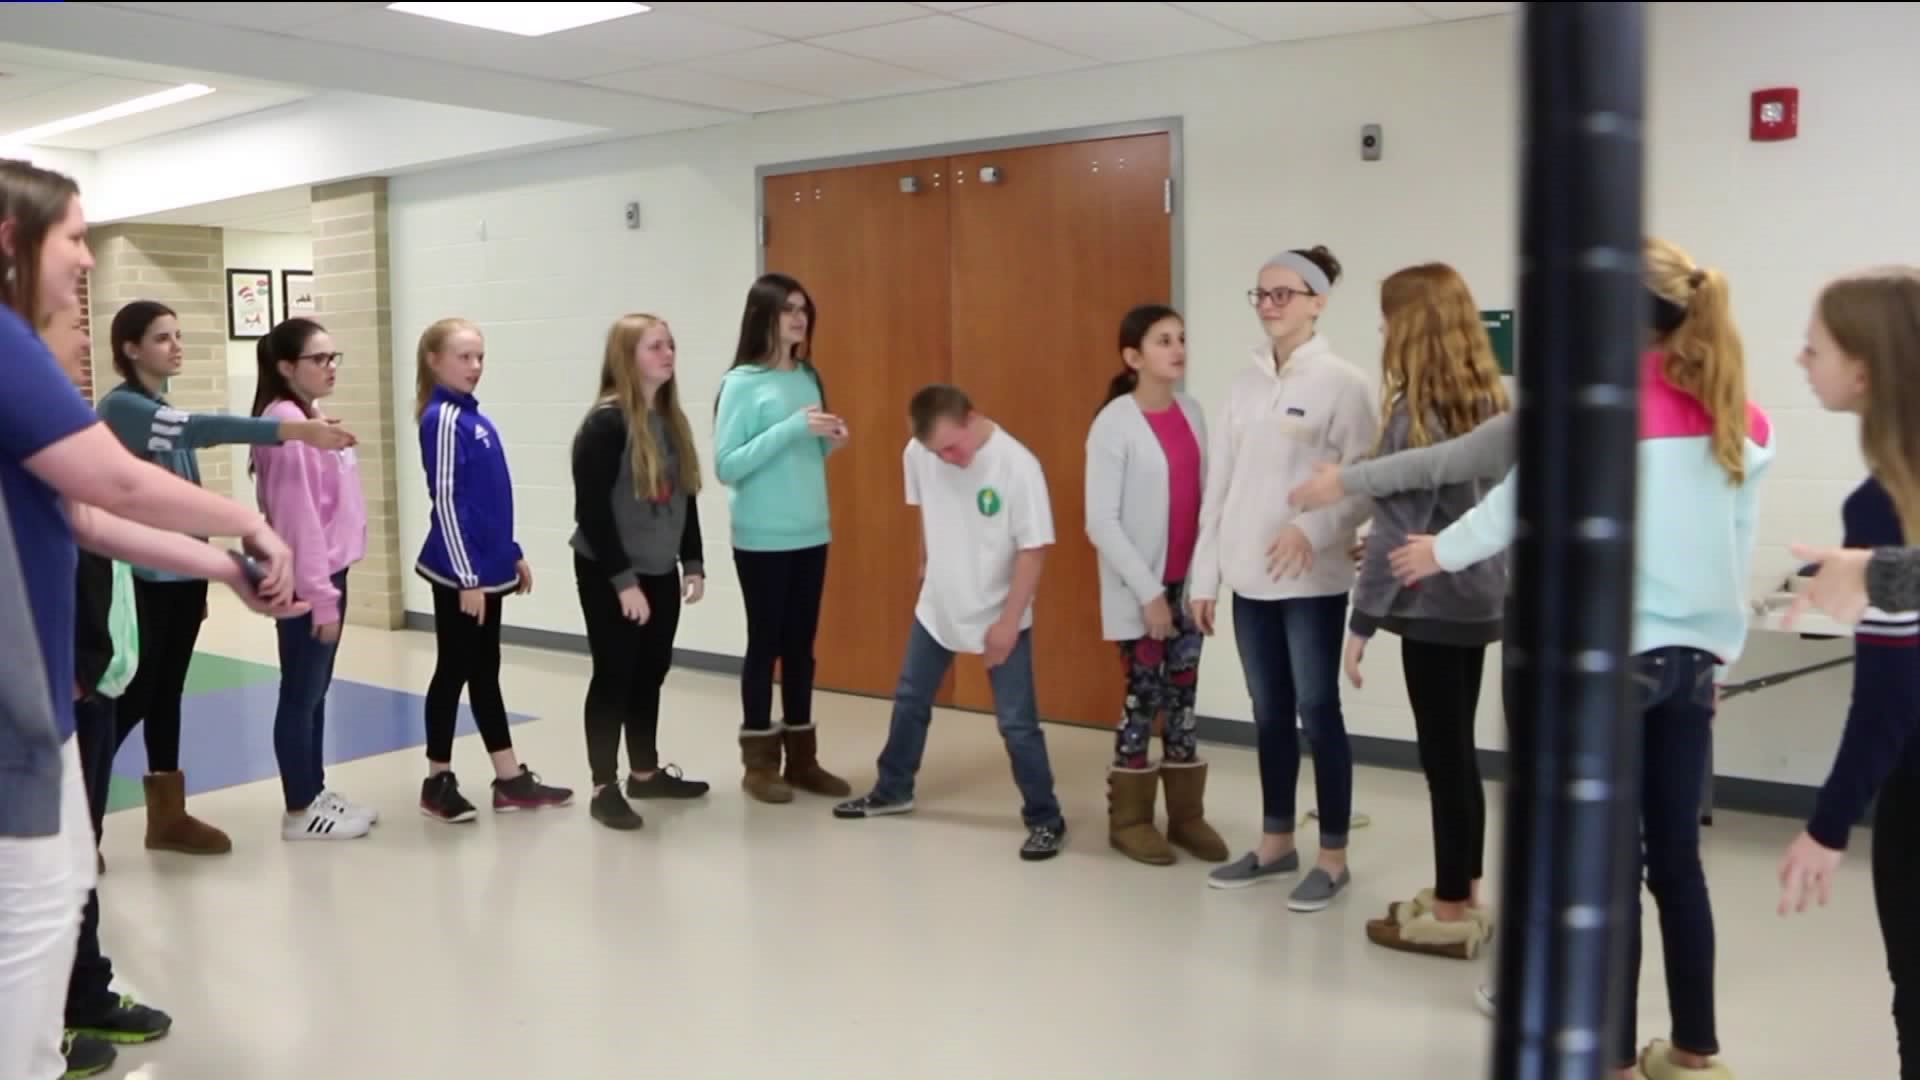 Unified theater program aims to include all students